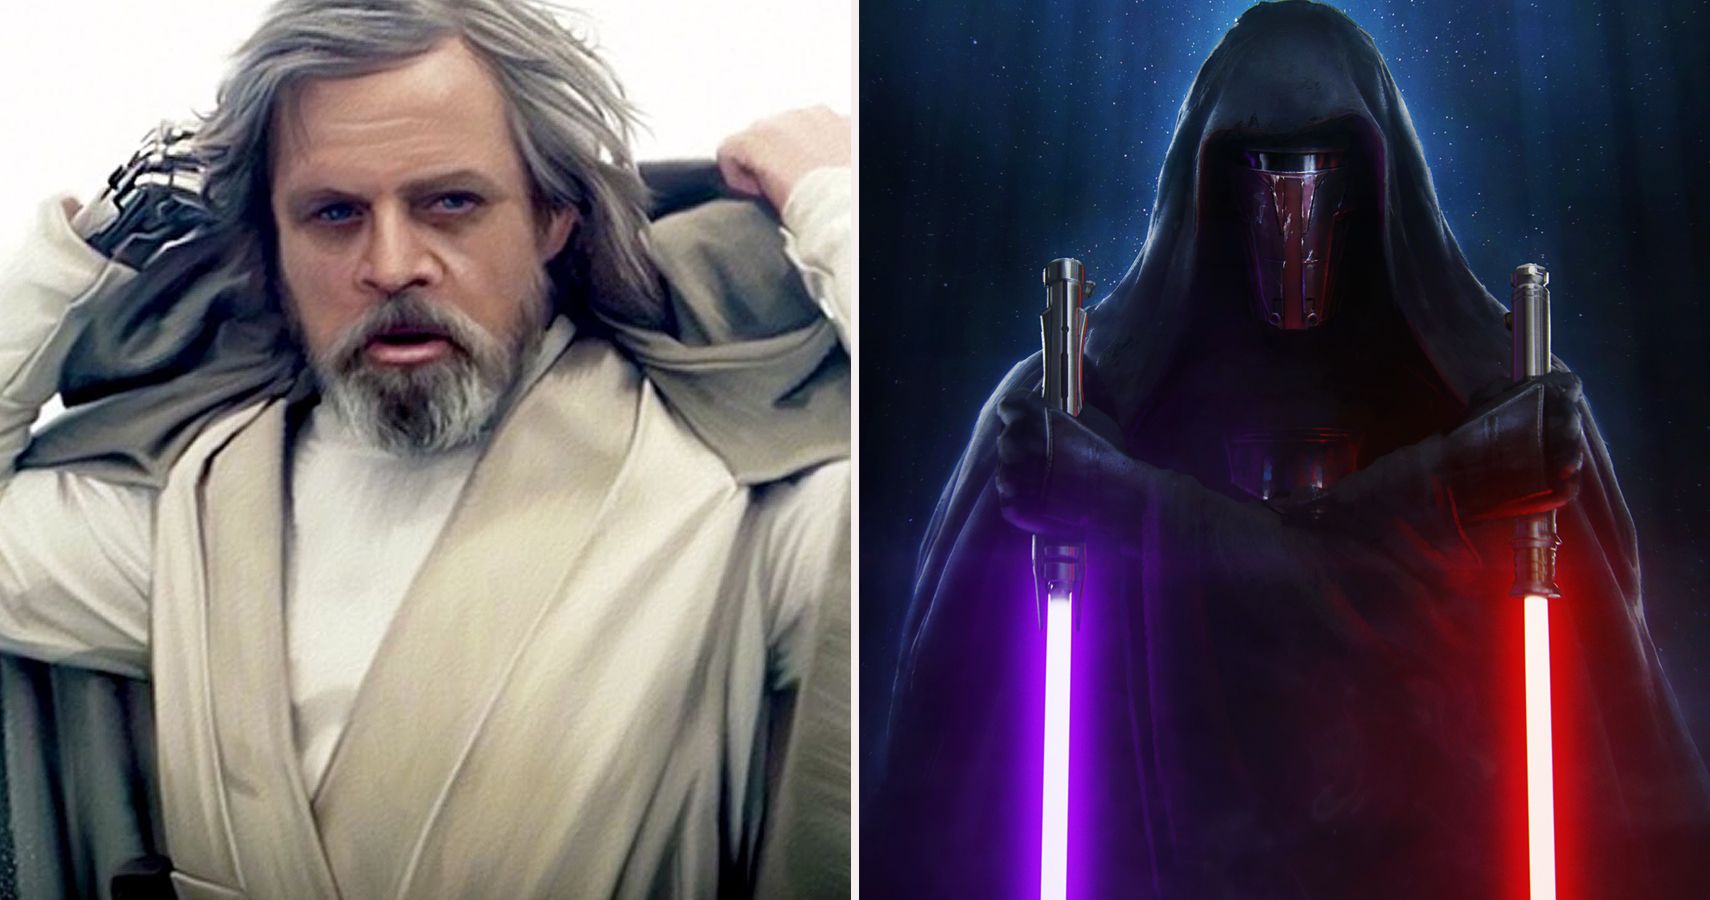 Who is more powerful than Revan?